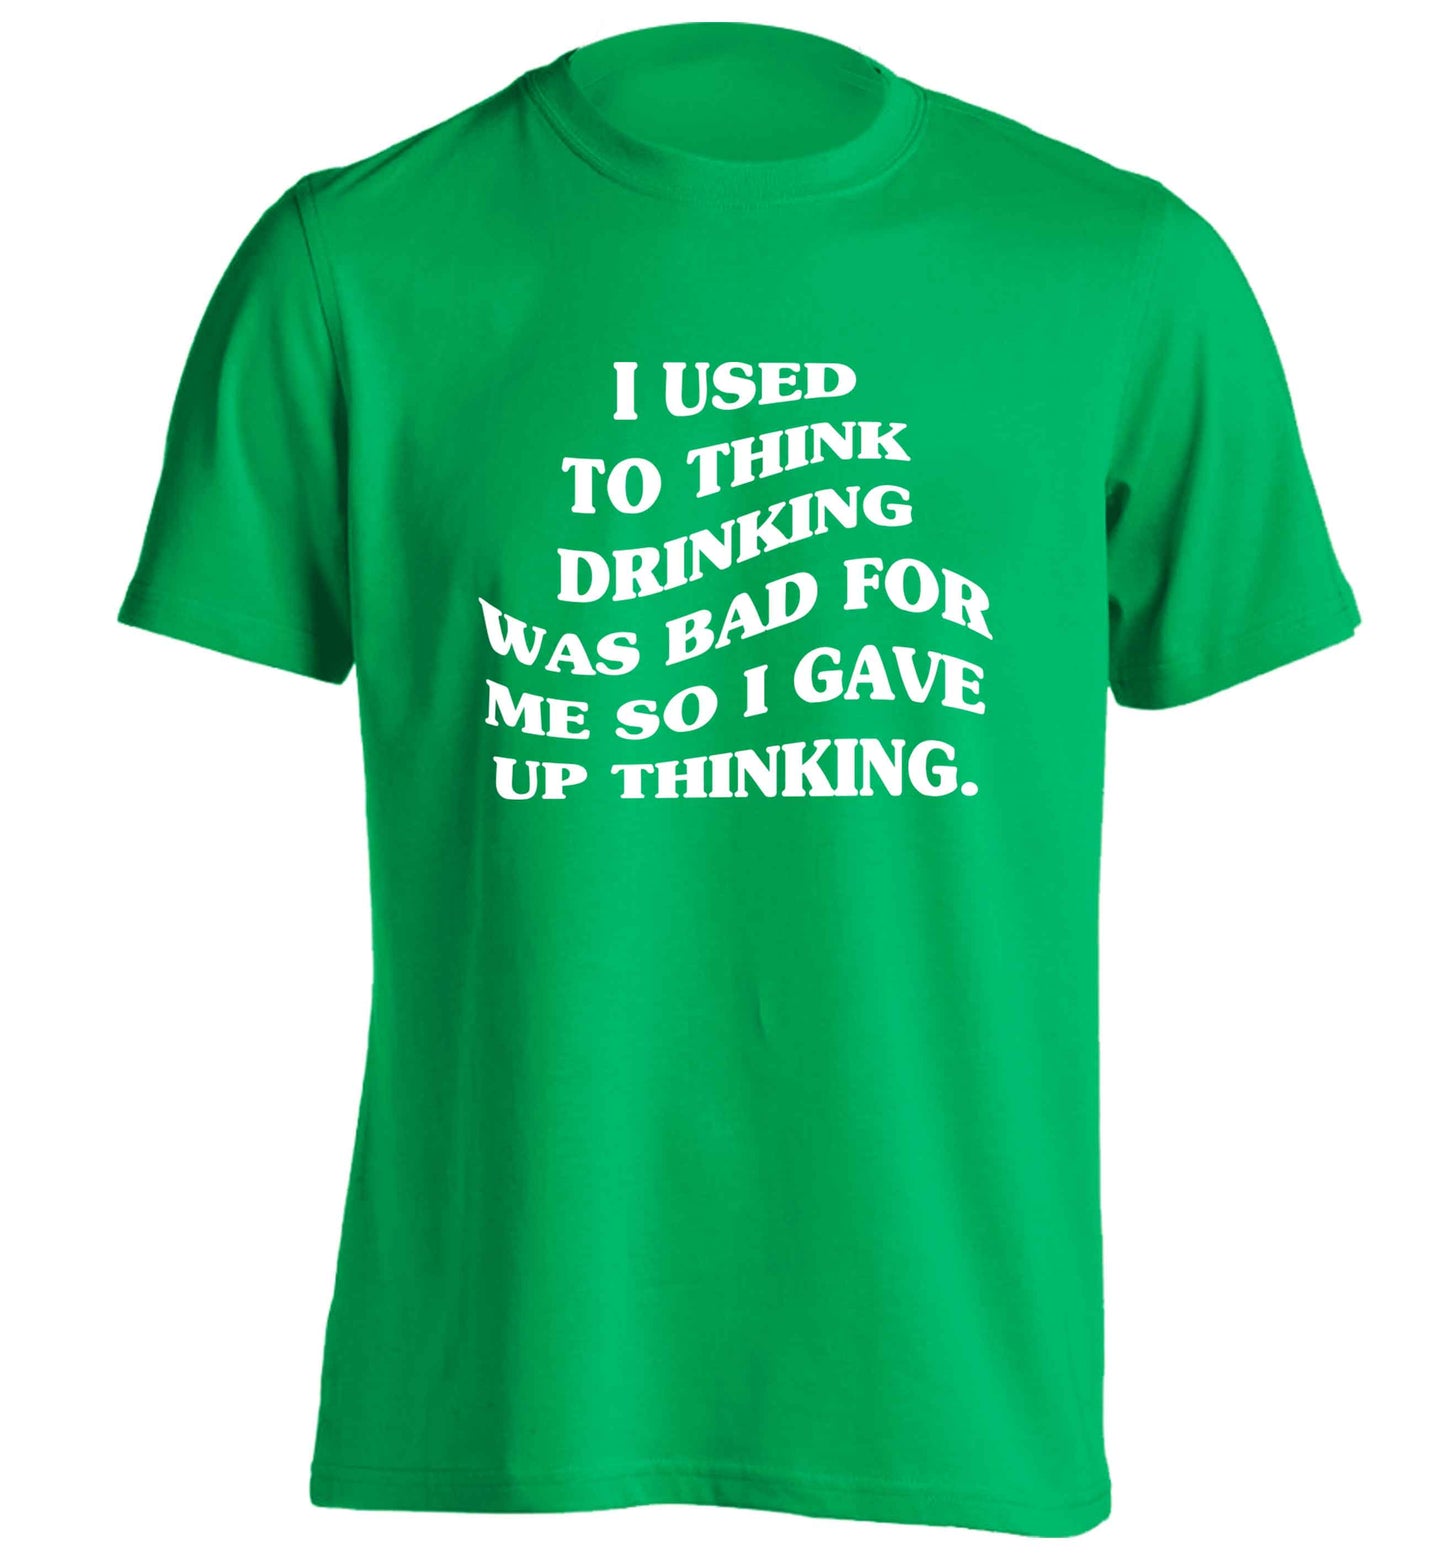 I used to think drinking was bad so I gave up thinking adults unisex green Tshirt 2XL